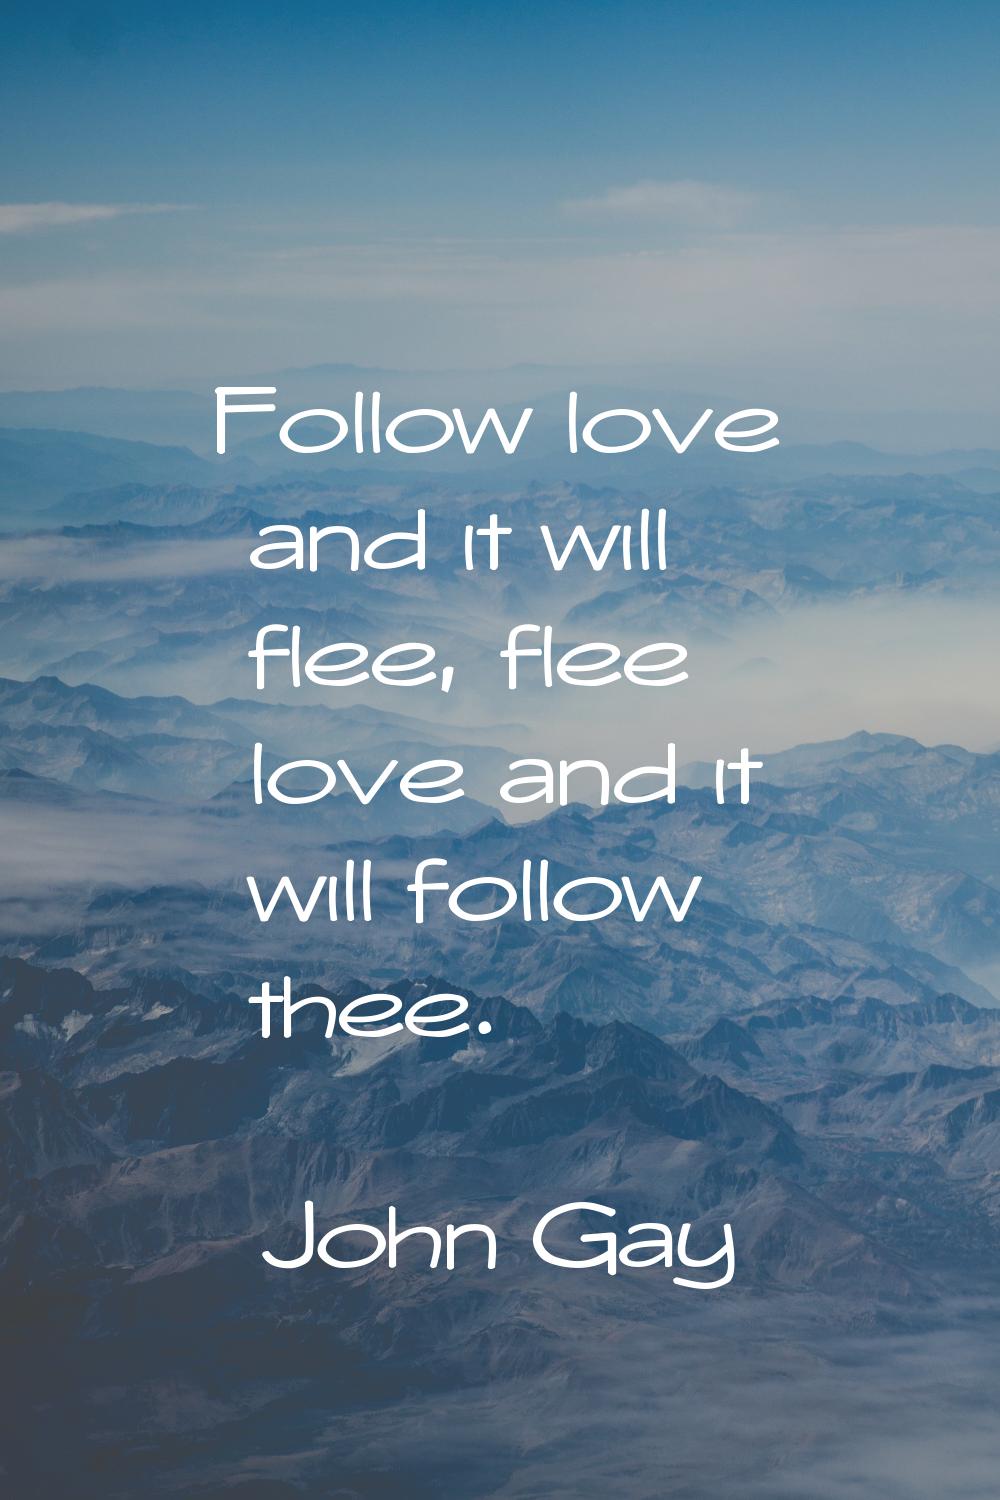 Follow love and it will flee, flee love and it will follow thee.